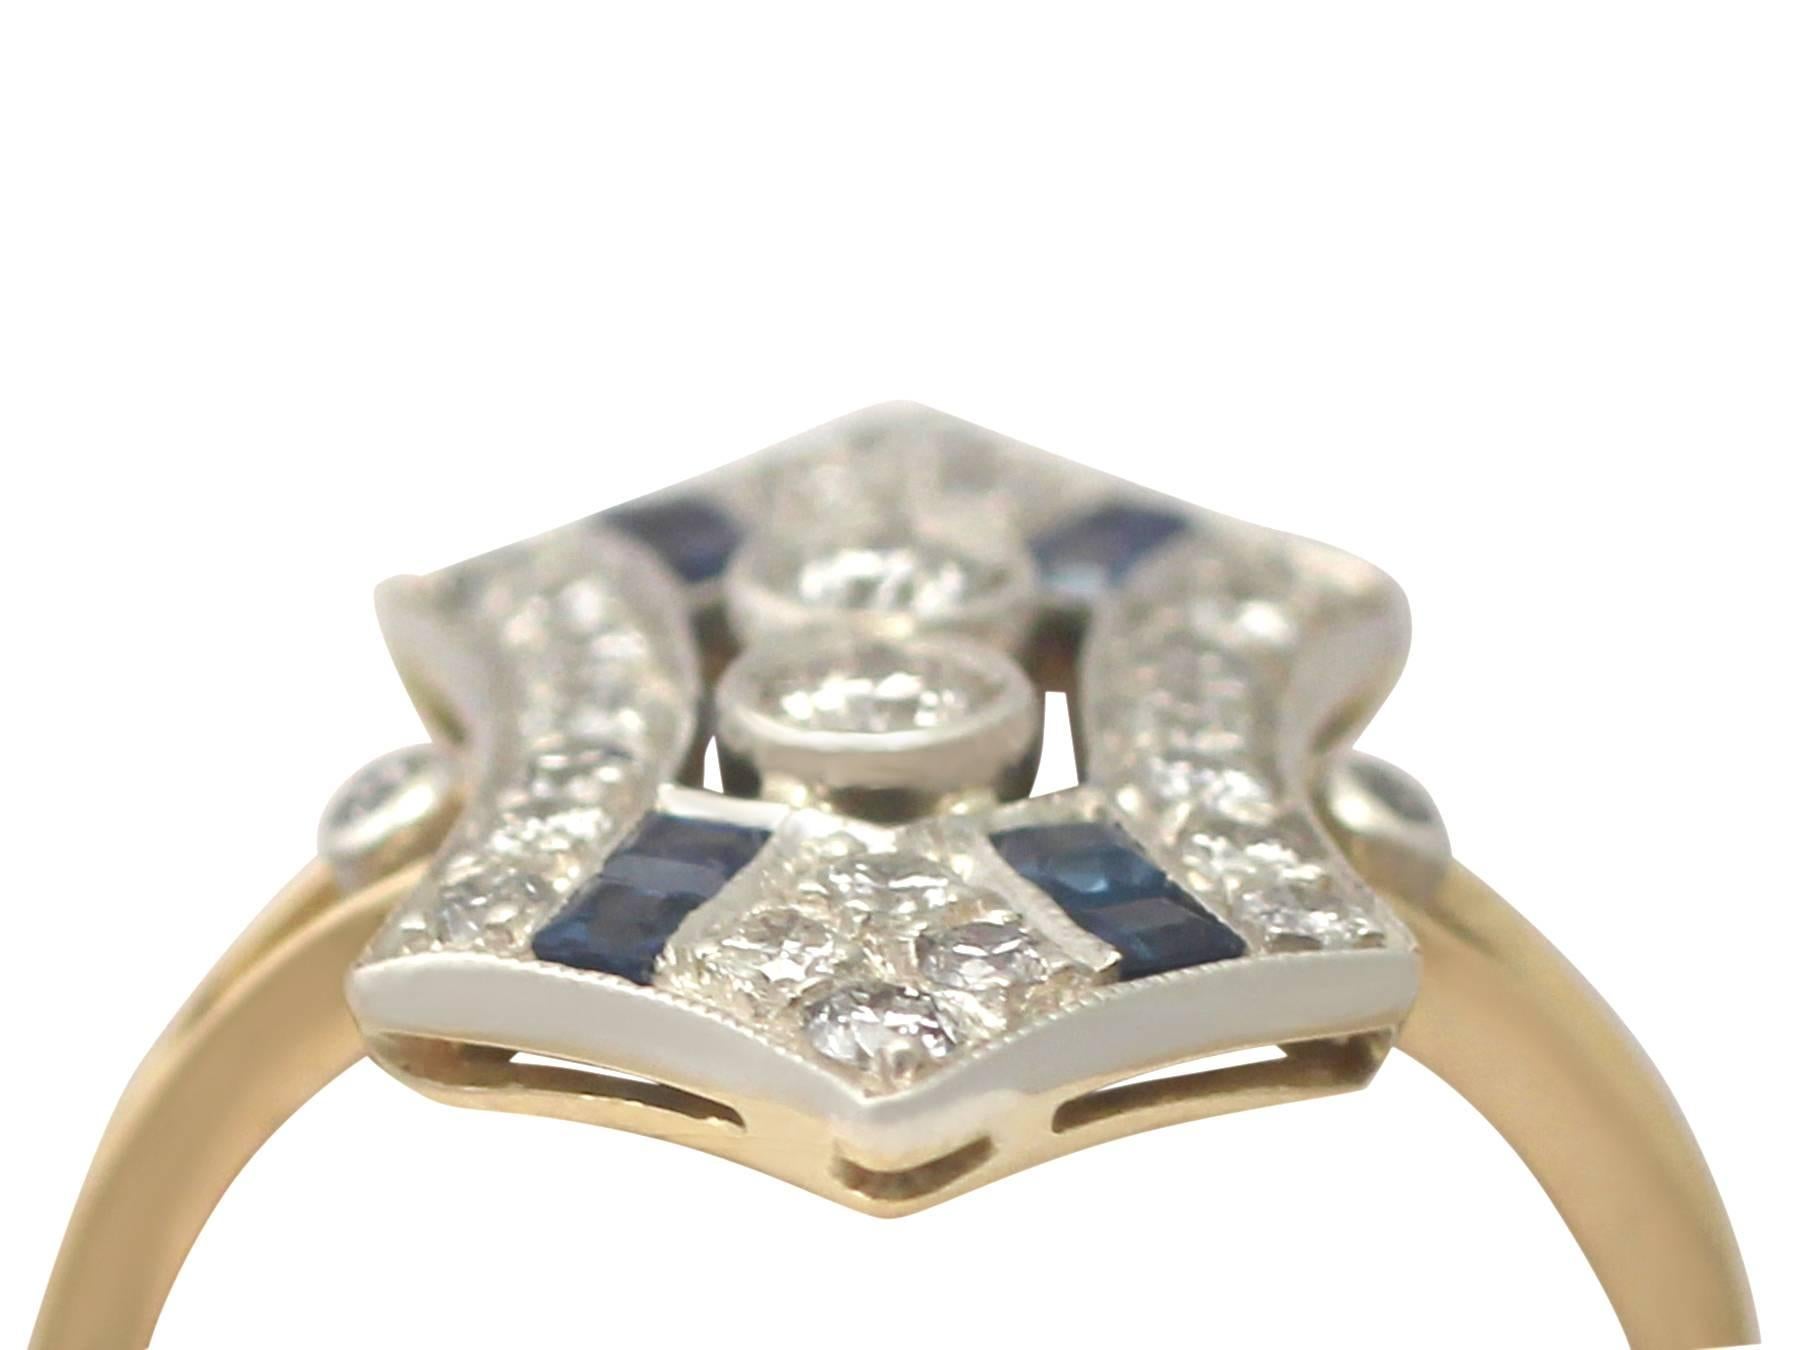 A fine and impressive 0.16 carat blue sapphire and 0.72 carat diamond, 18k yellow gold, silver set dress ring in the Art Deco style; part of our antique jewellery and estate jewelry collections

This fine and impressive antique sapphire and